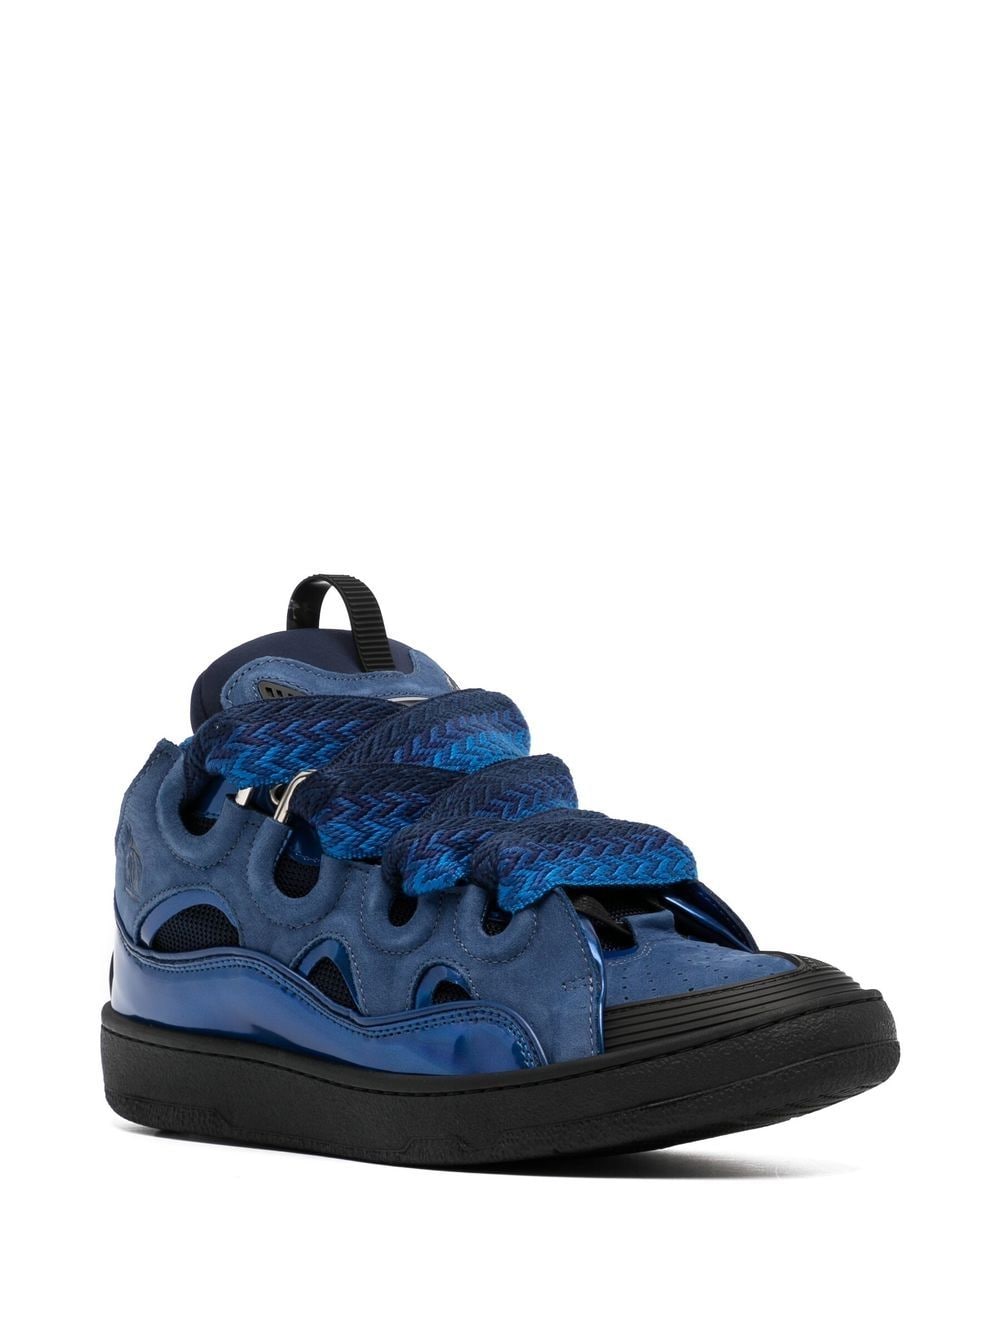 Lanvin Curb Panelled Leather Sneakers - Farfetch